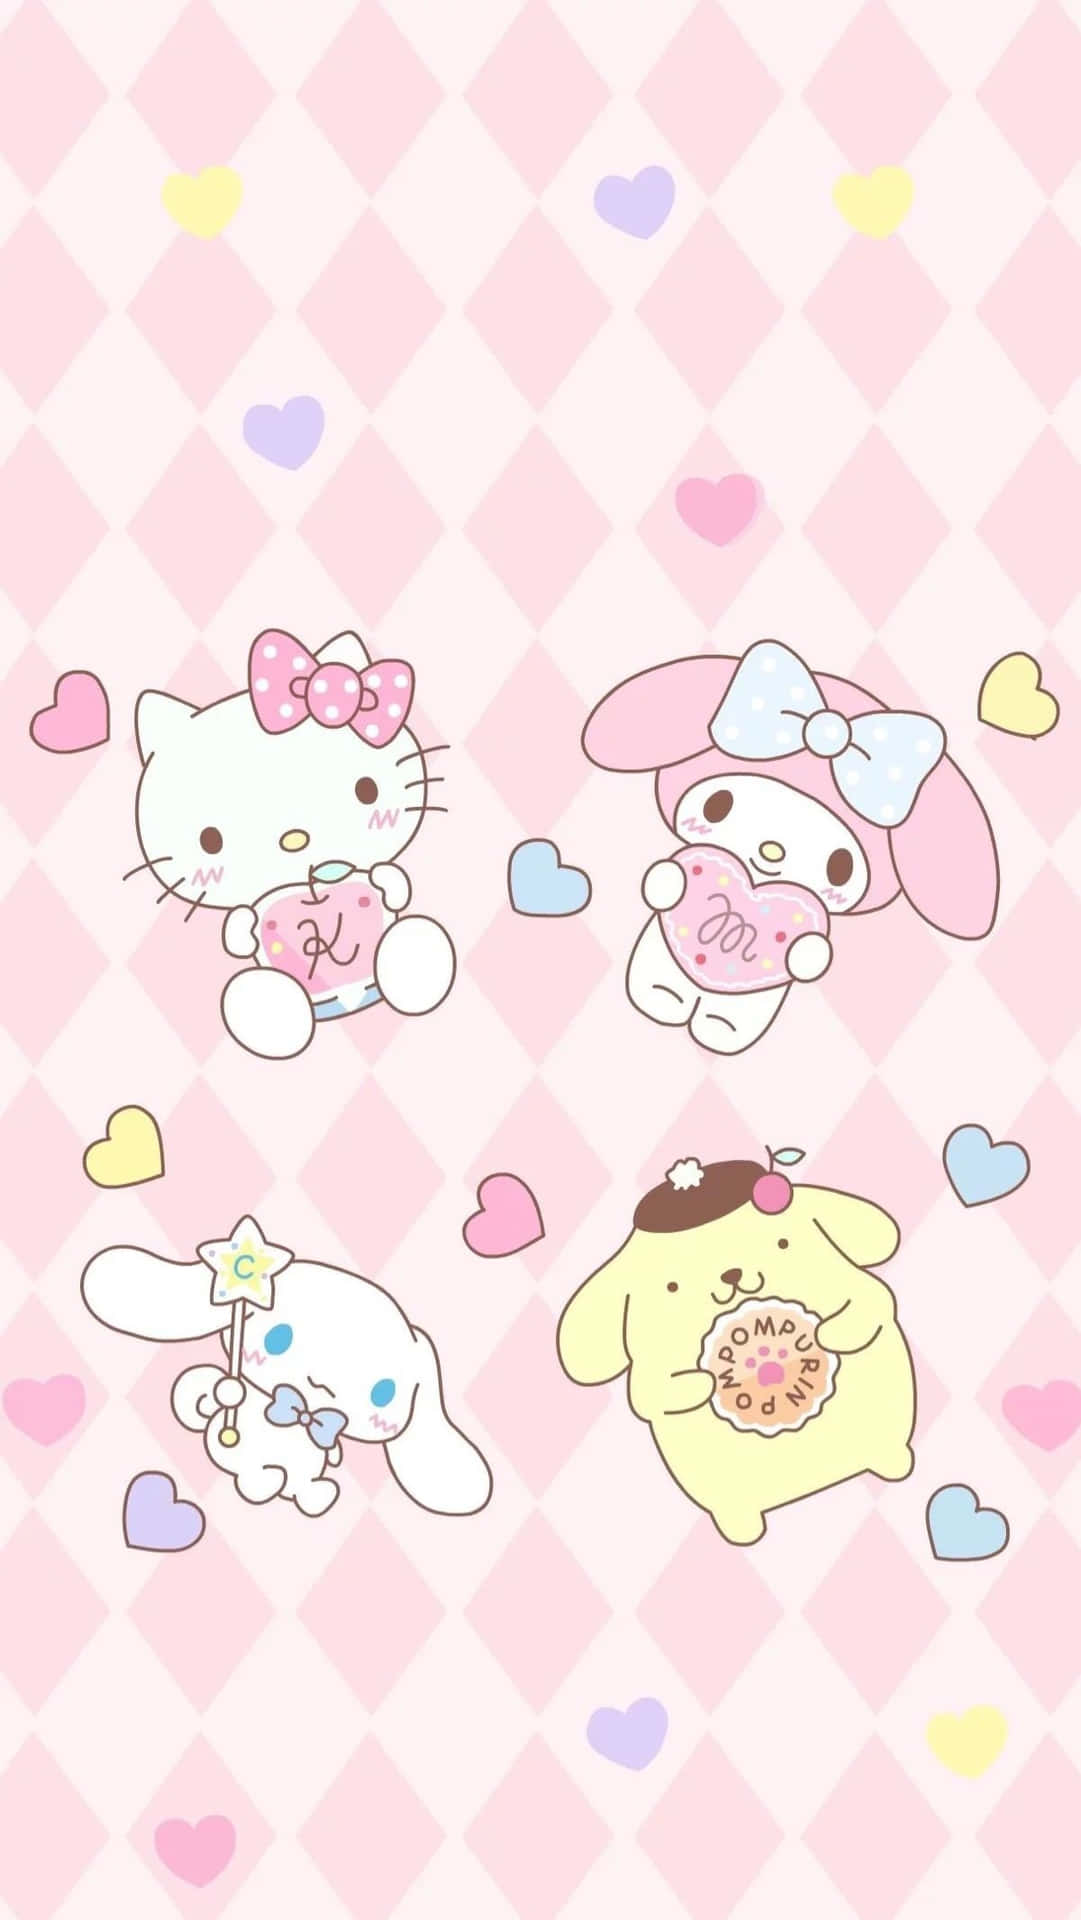 IPhone wallpaper Sanrio Characters with high-resolution 1080x1920 pixel. You can use this wallpaper for your iPhone 5, 6, 7, 8, X, XS, XR backgrounds, Mobile Screensaver, or iPad Lock Screen - Sanrio